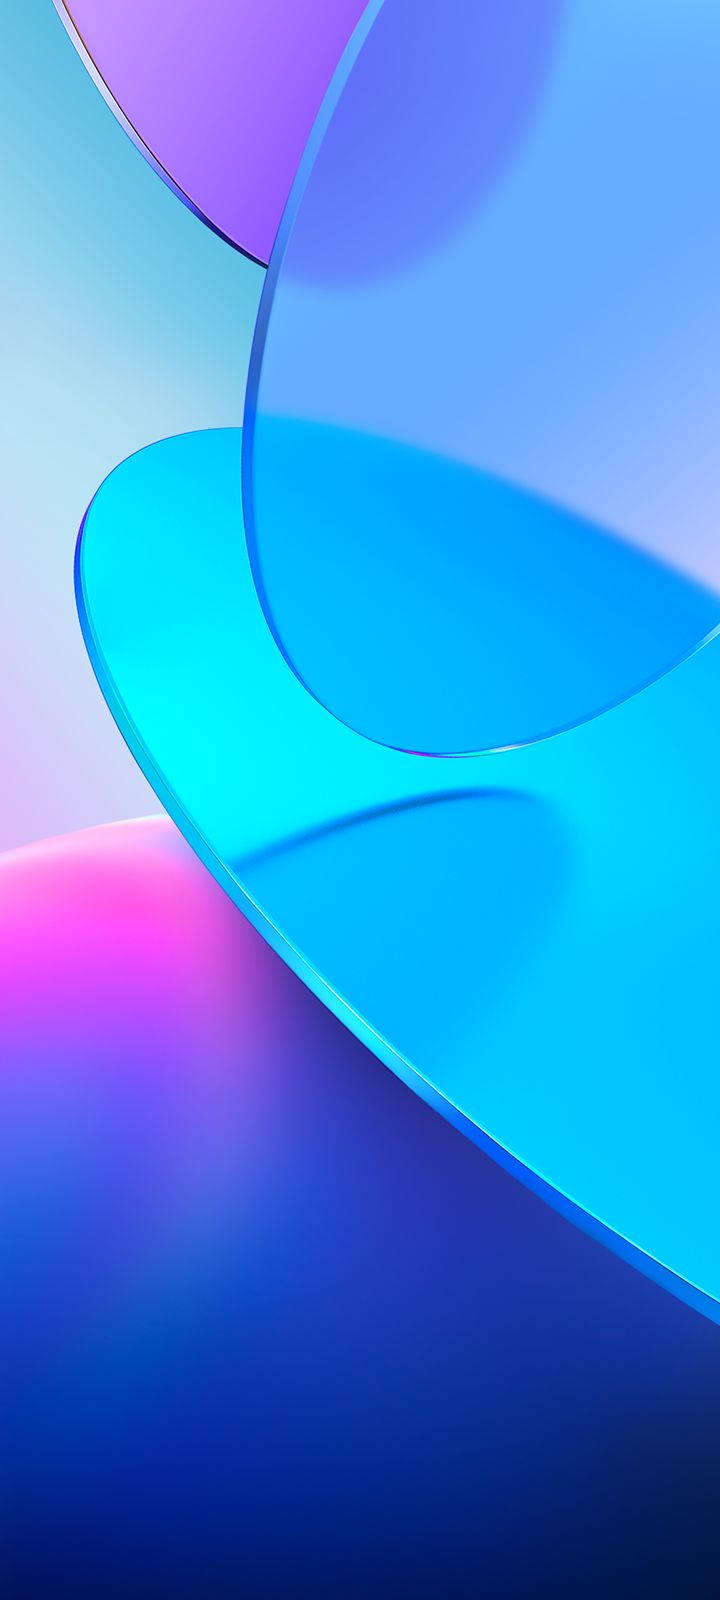 Vivo S10 Pro Stock Wallpapers  Oneplus wallpapers Xiaomi wallpapers  Cellphone wallpaper backgrounds